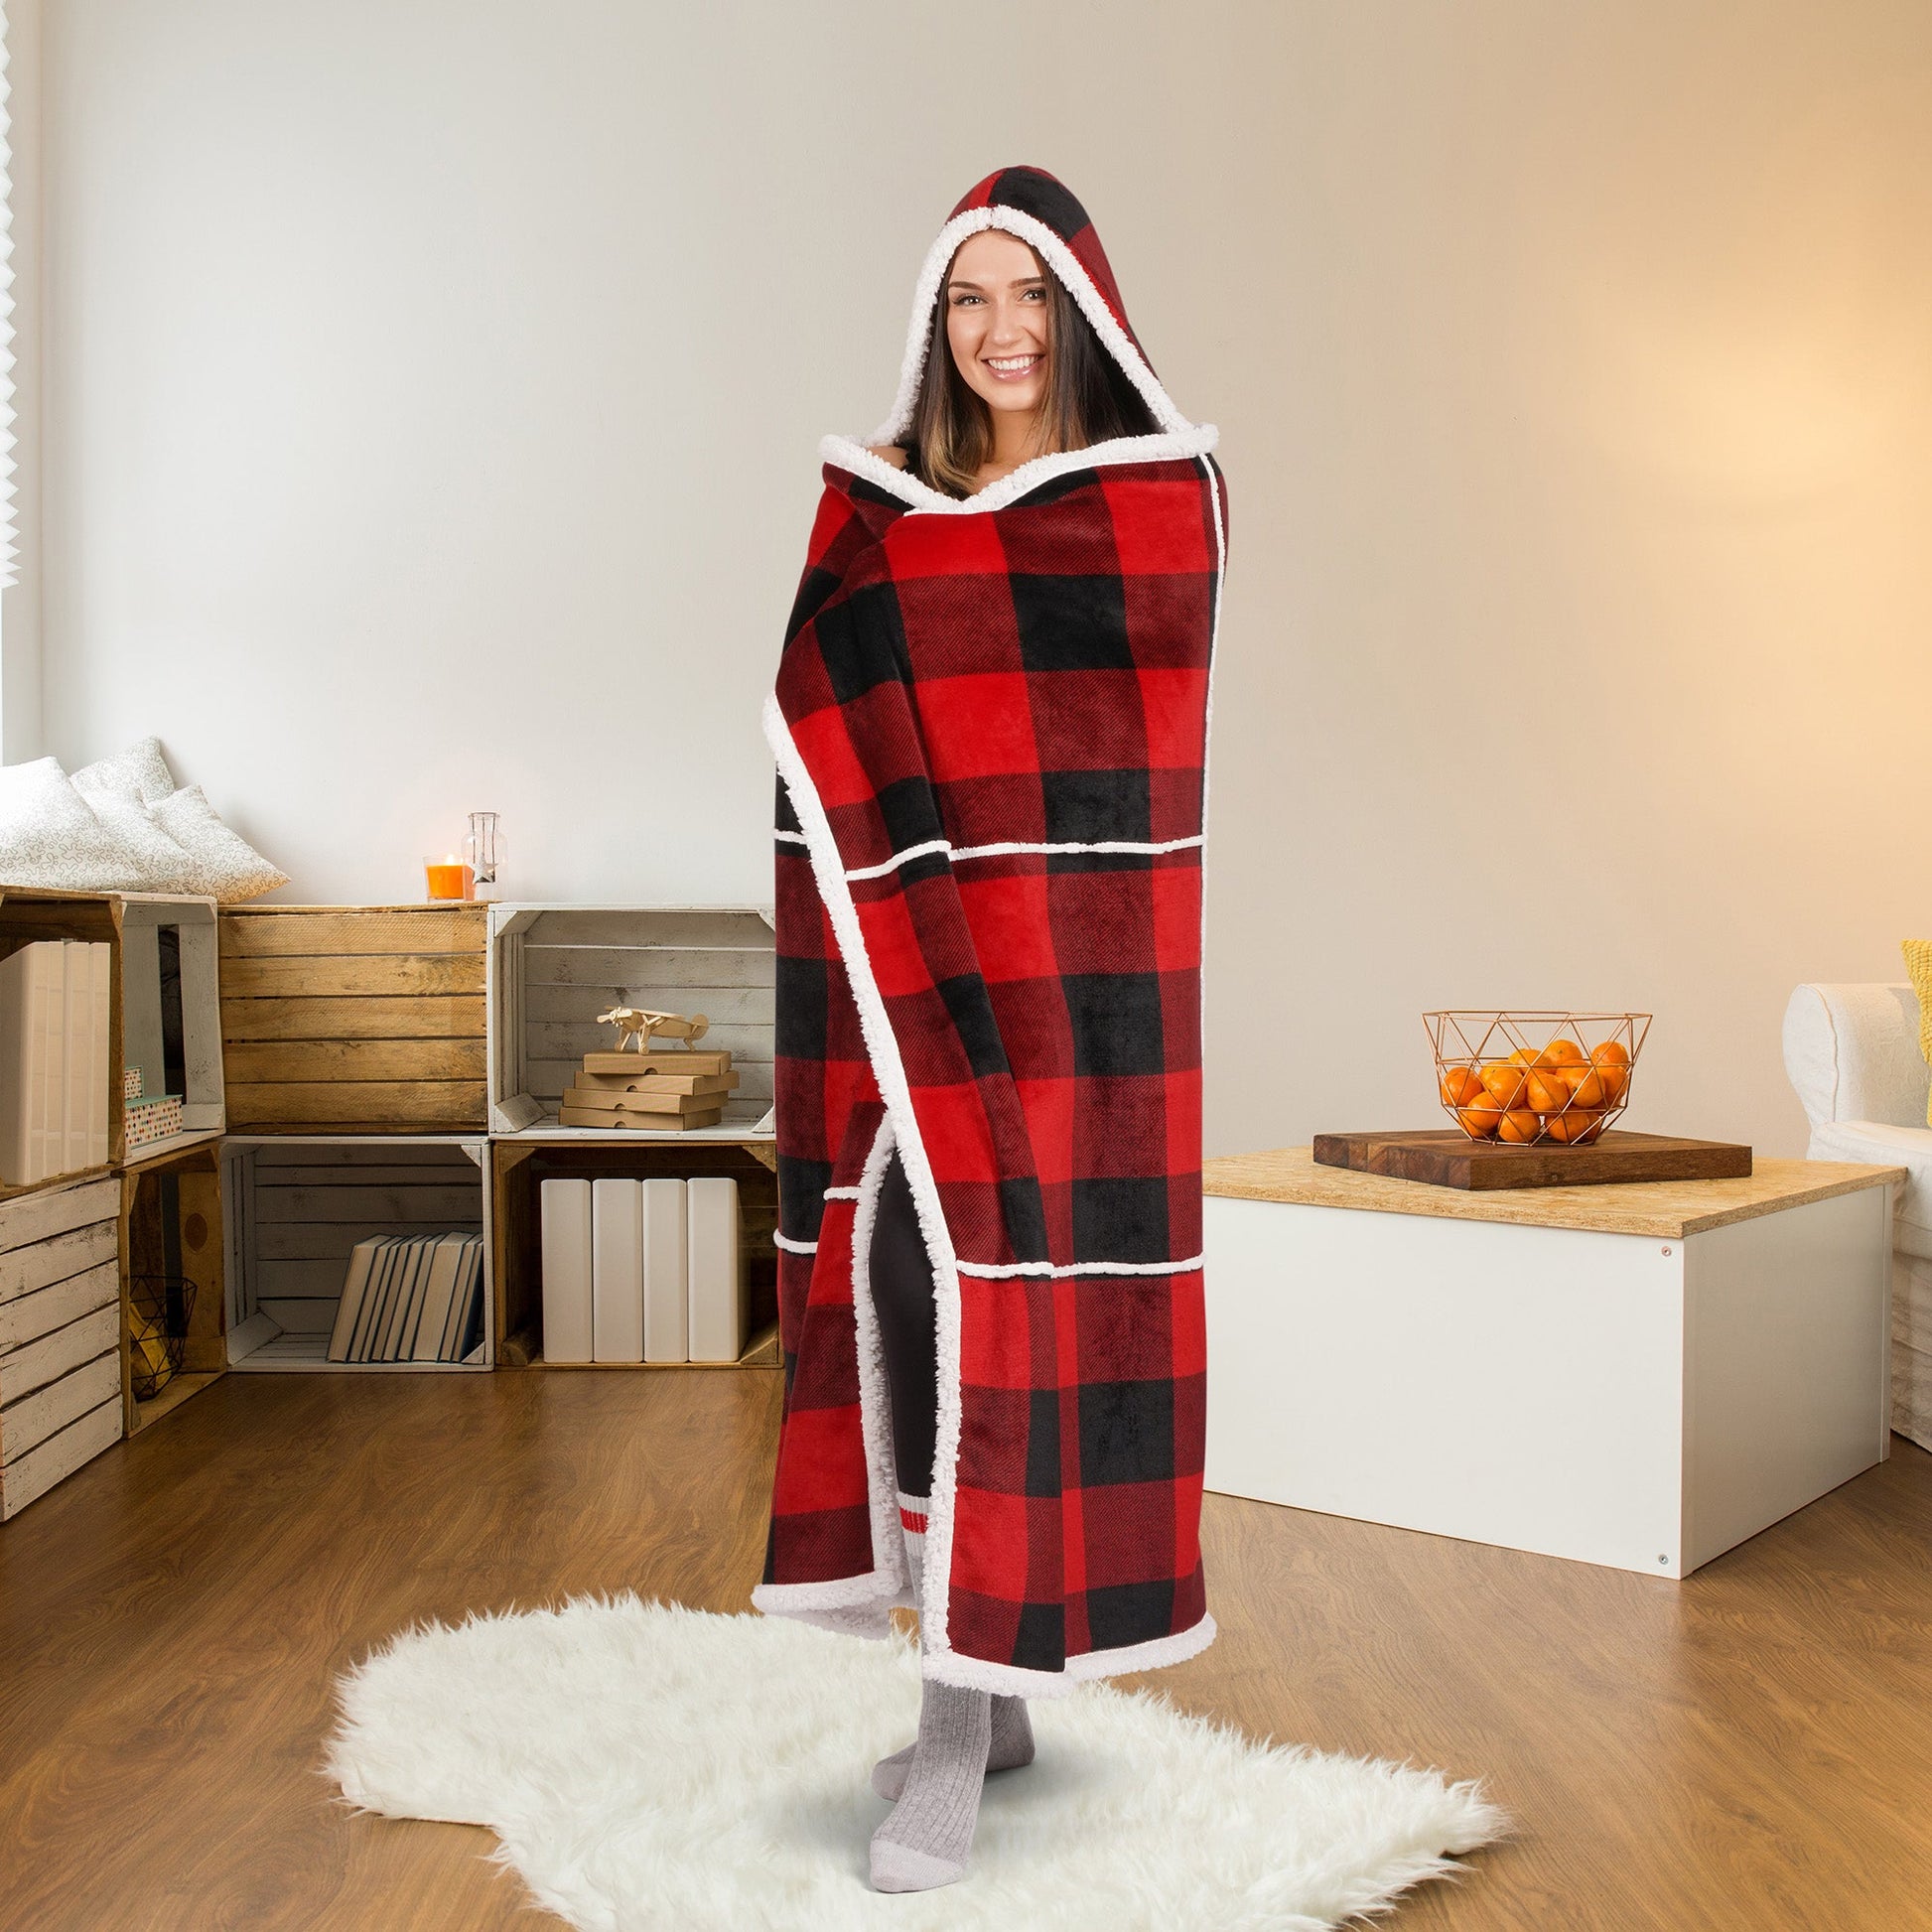 Super Soft Printed Flannel Hooded Blanket Throw Home Decor Bedding 48X65 Red Buffalo Plaid